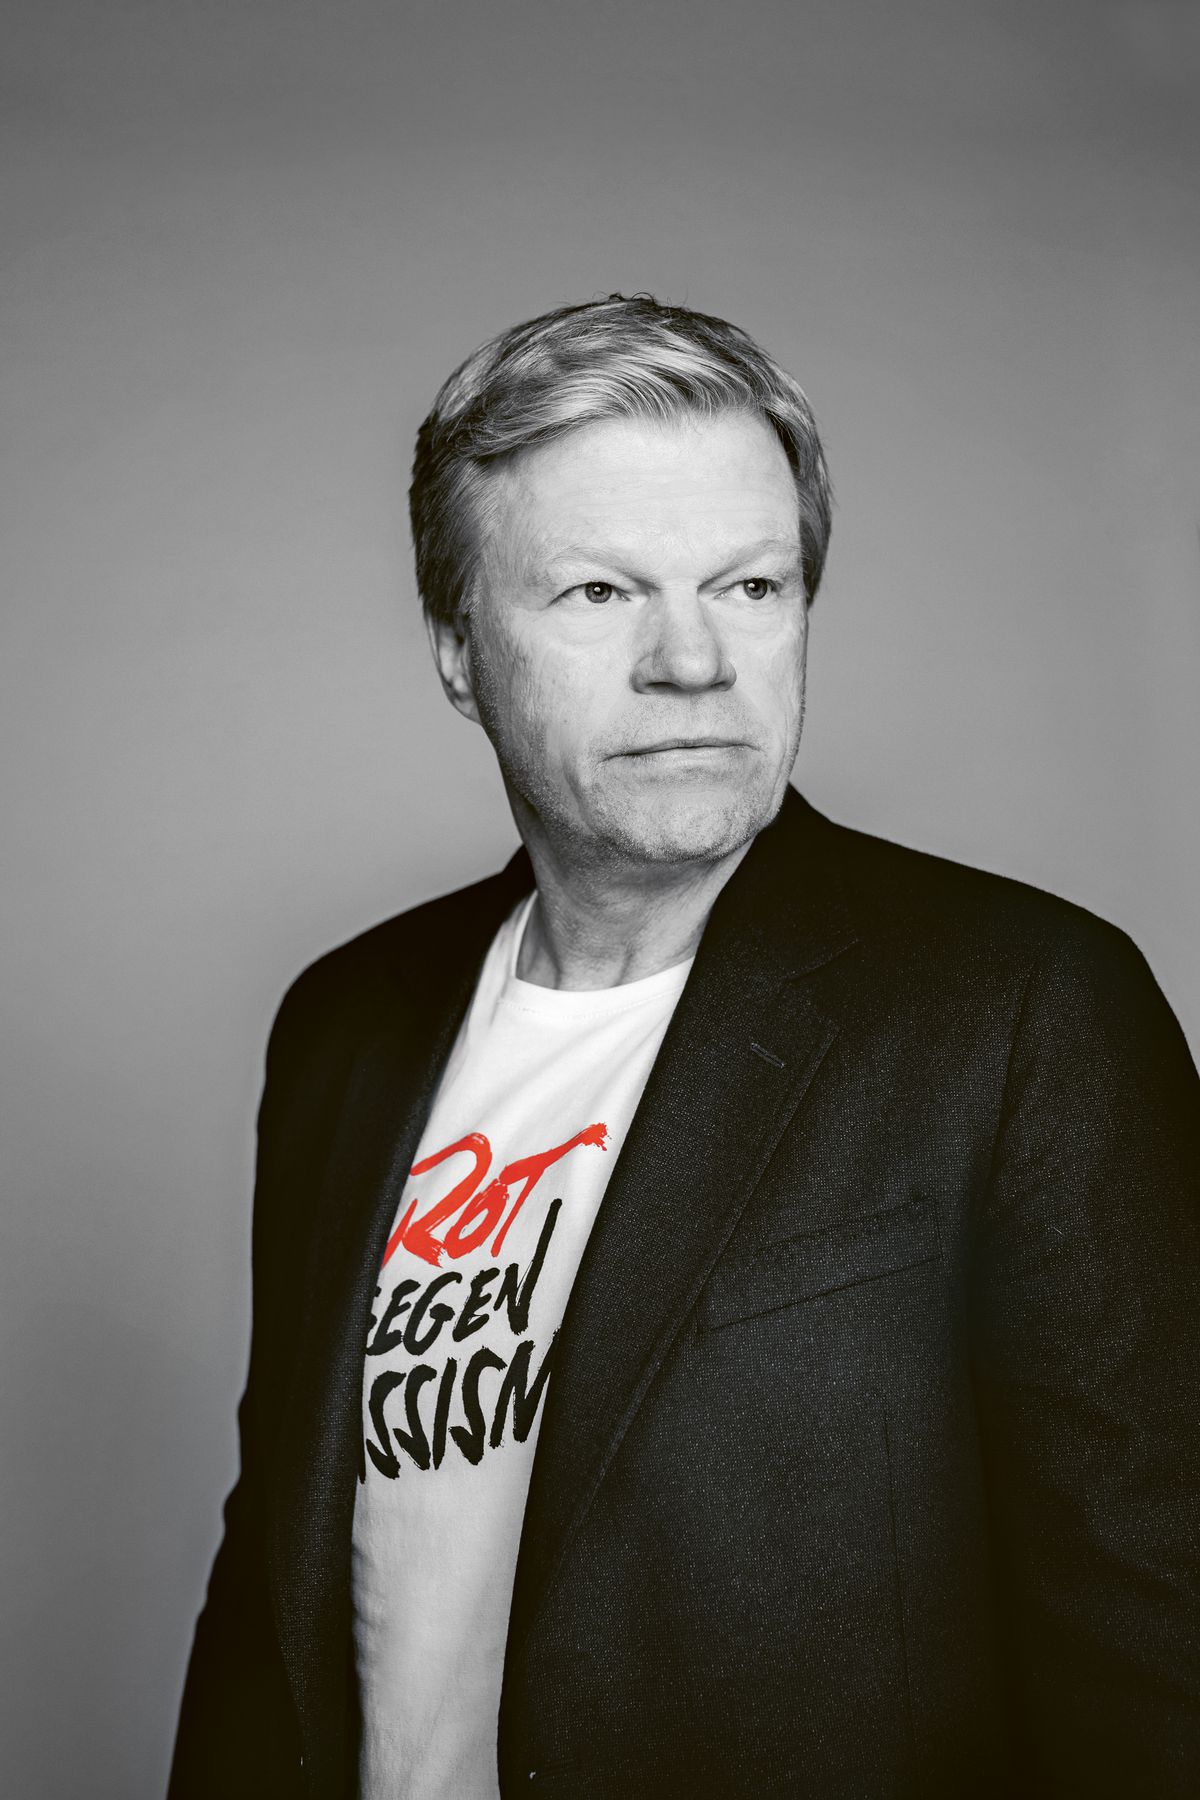 Bayern executive Oliver Kahn wears Bayern Munich's "Rot gegen Rassismus" ("Red against Racism") t-shirt in support of Bayern's new anti-racism campaign.